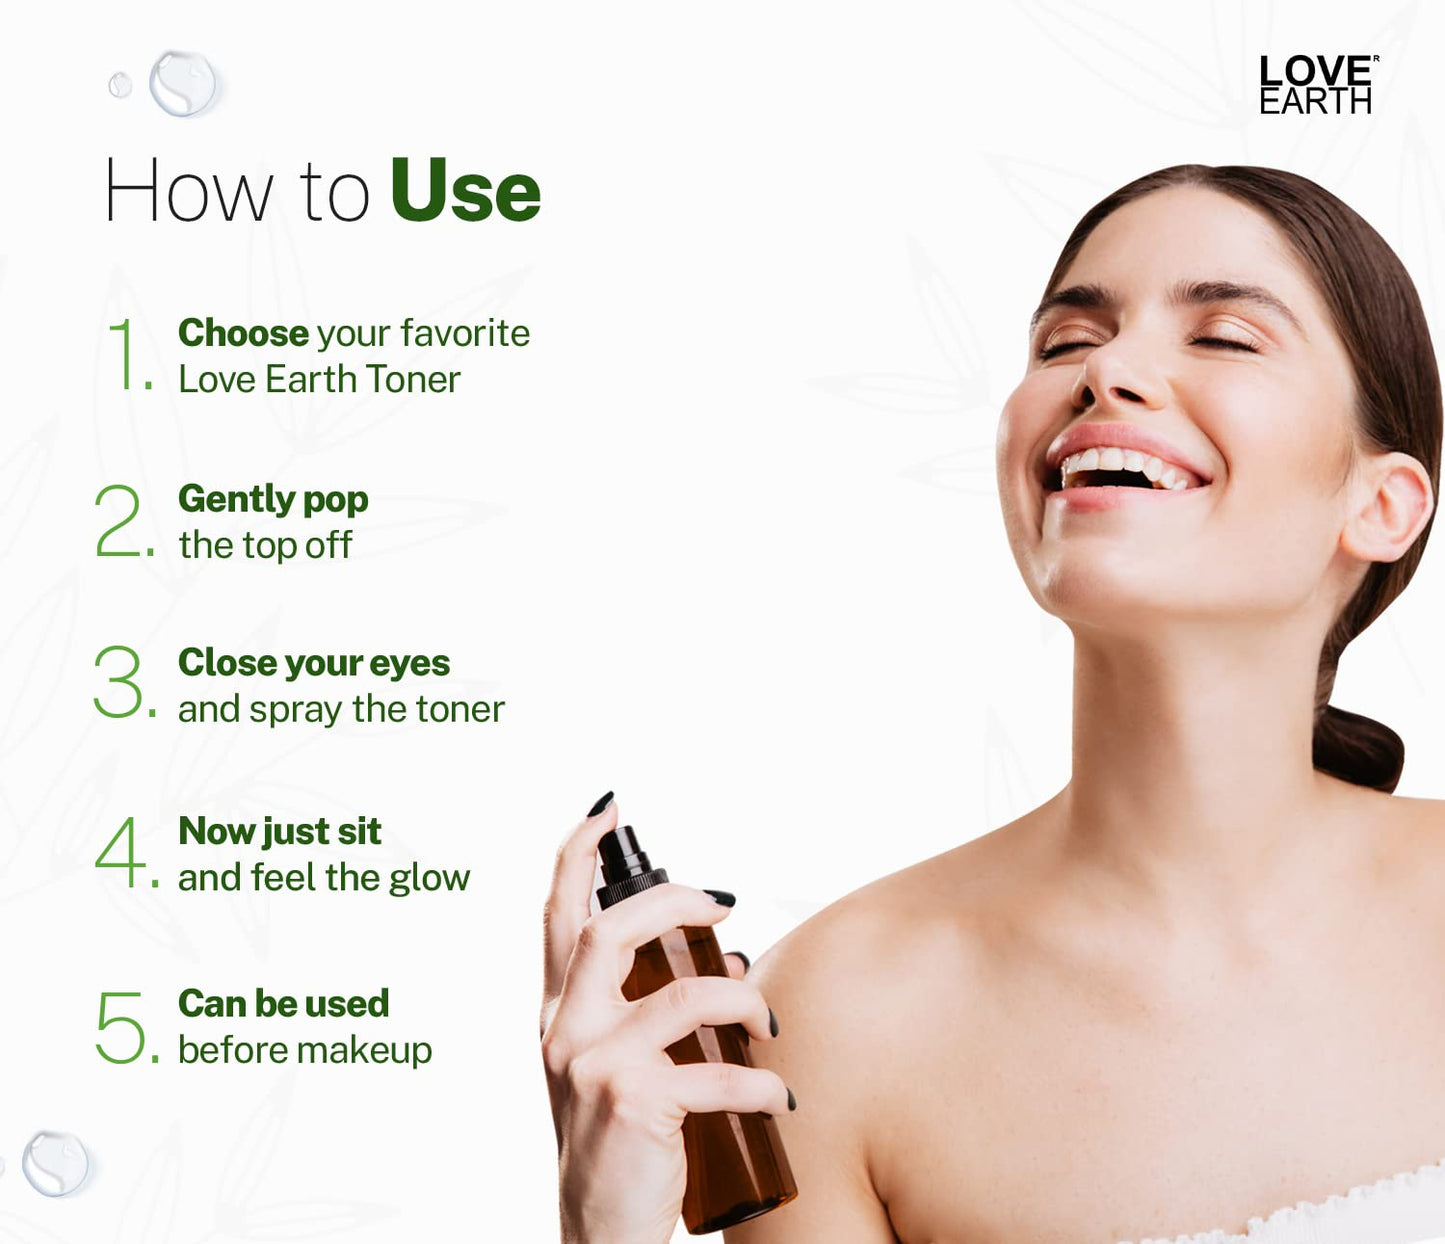 Love Earth Collagen Boosting Toner With Aloe Vera Extracts